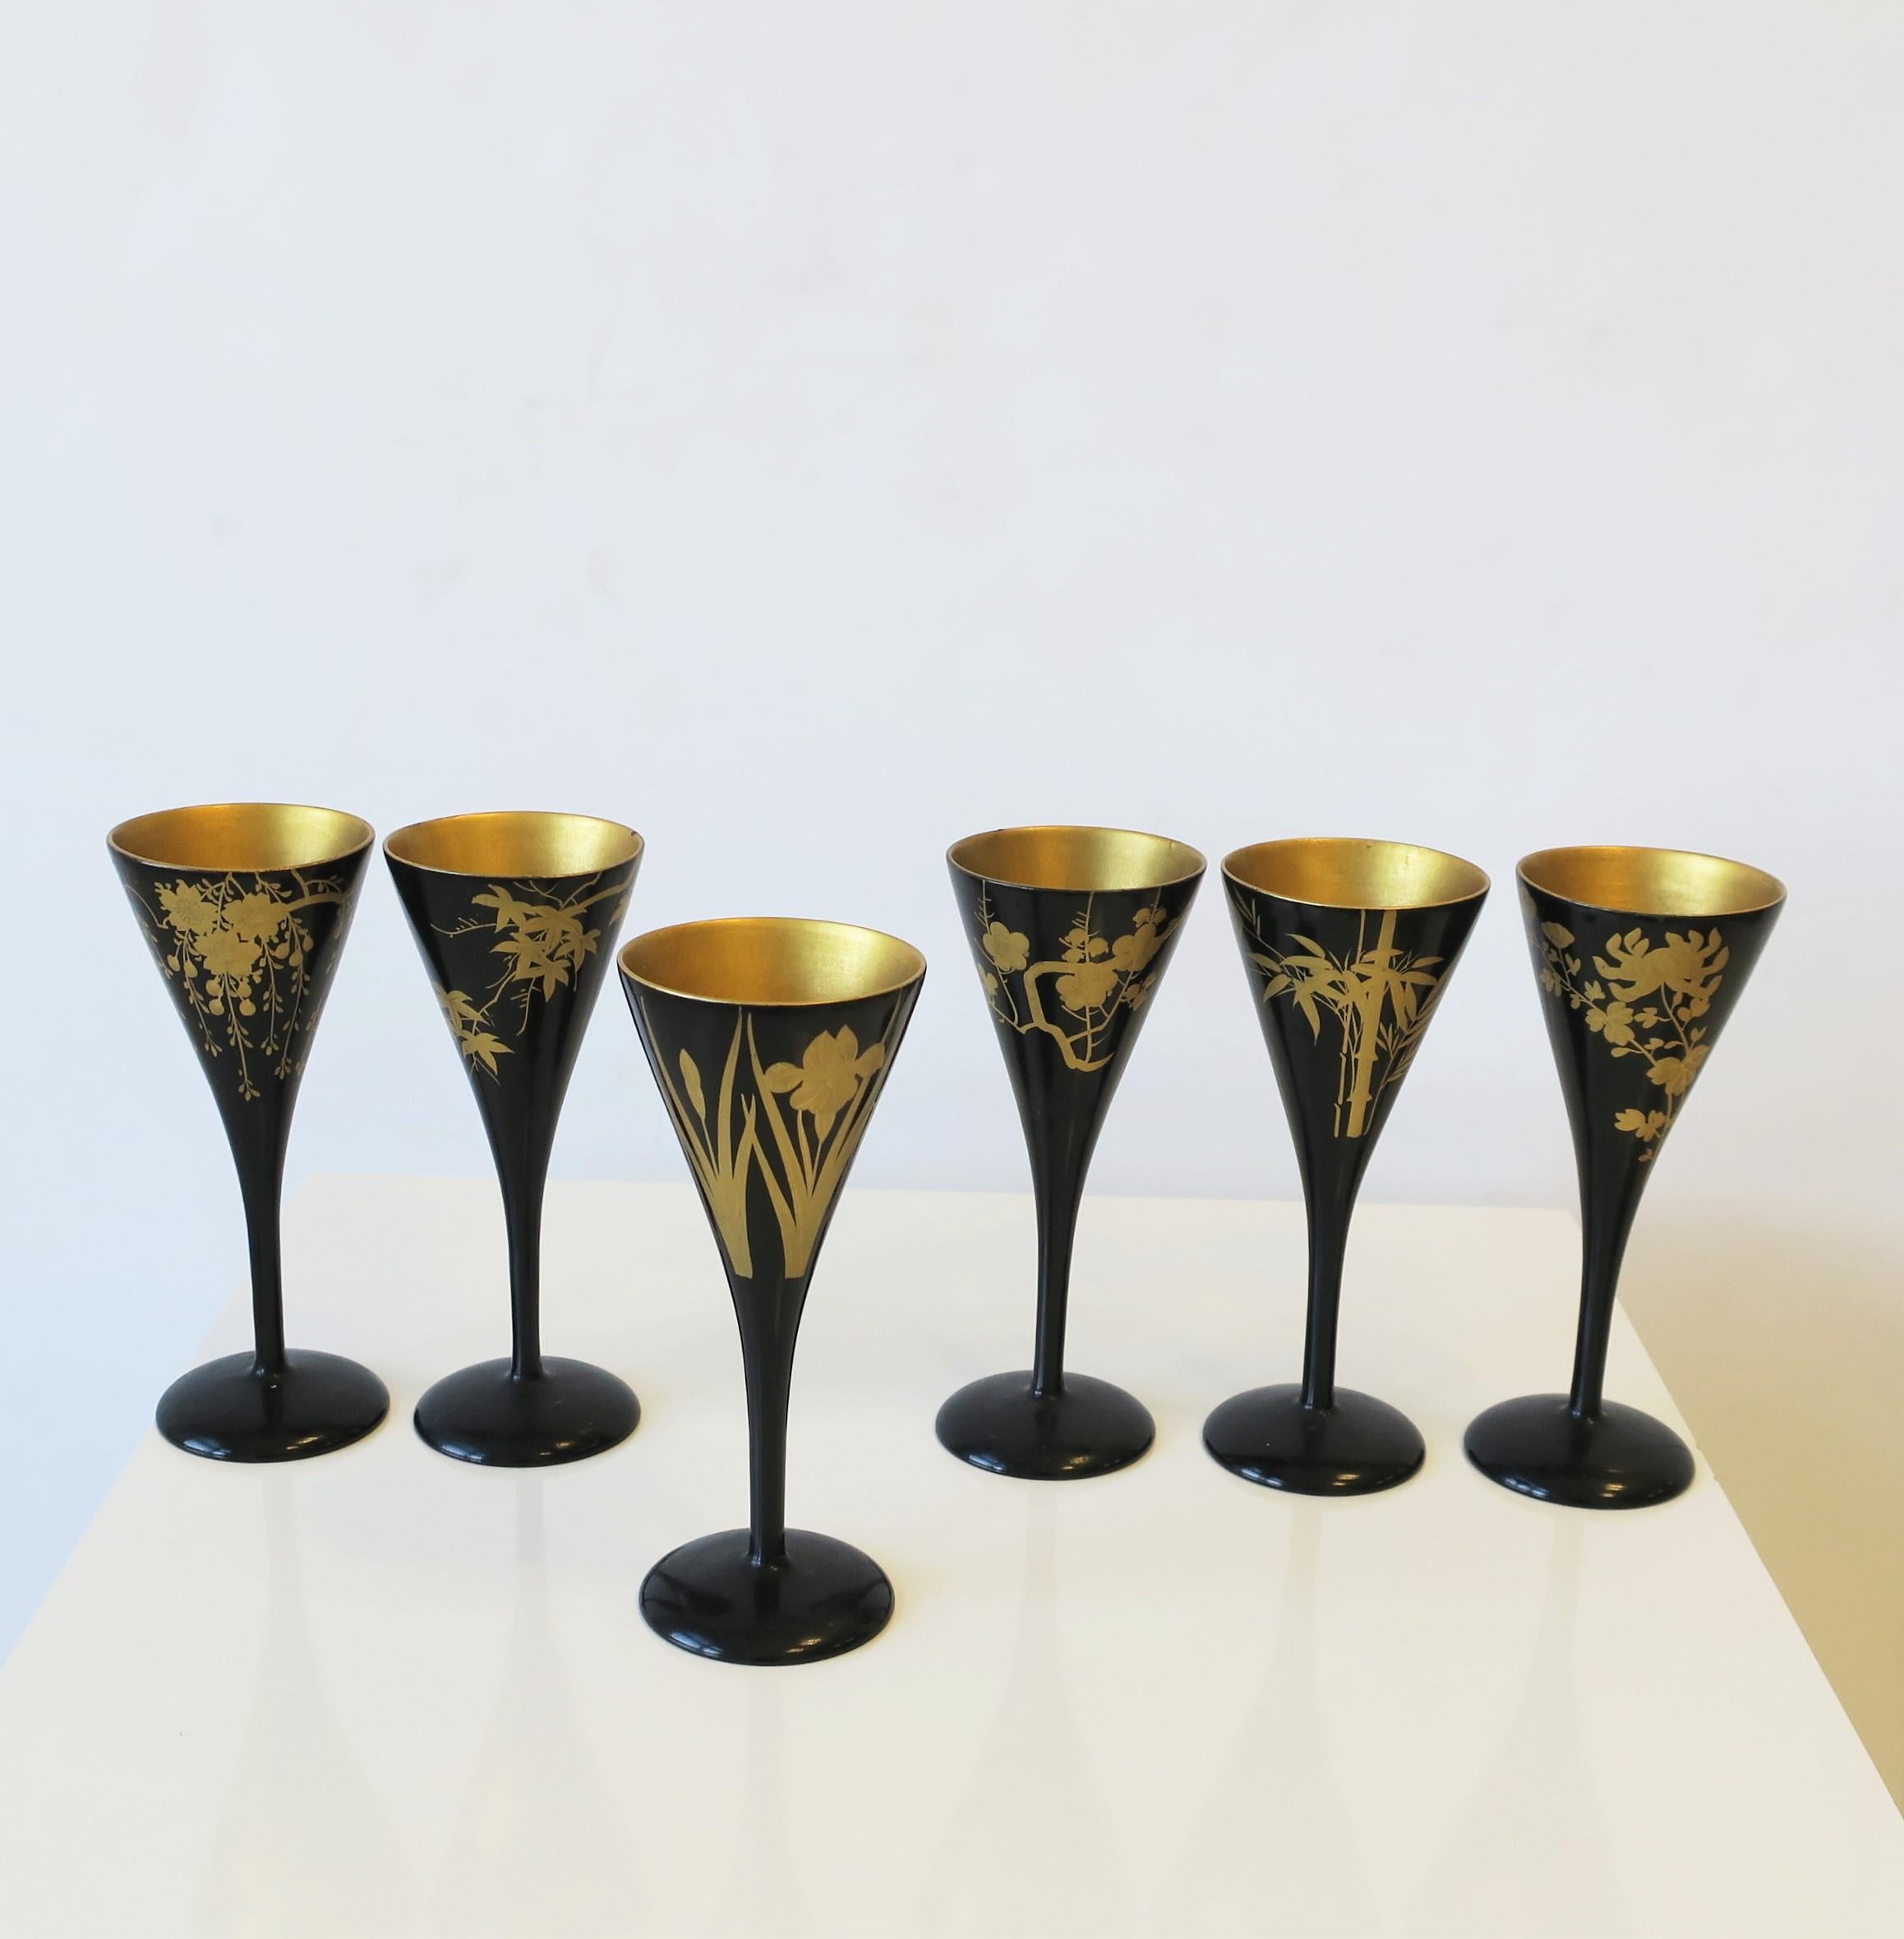 Japanese Black Lacquer & Gold Sake, Champagne Flutes or Wine Stemware, Set of 6 In Good Condition For Sale In New York, NY